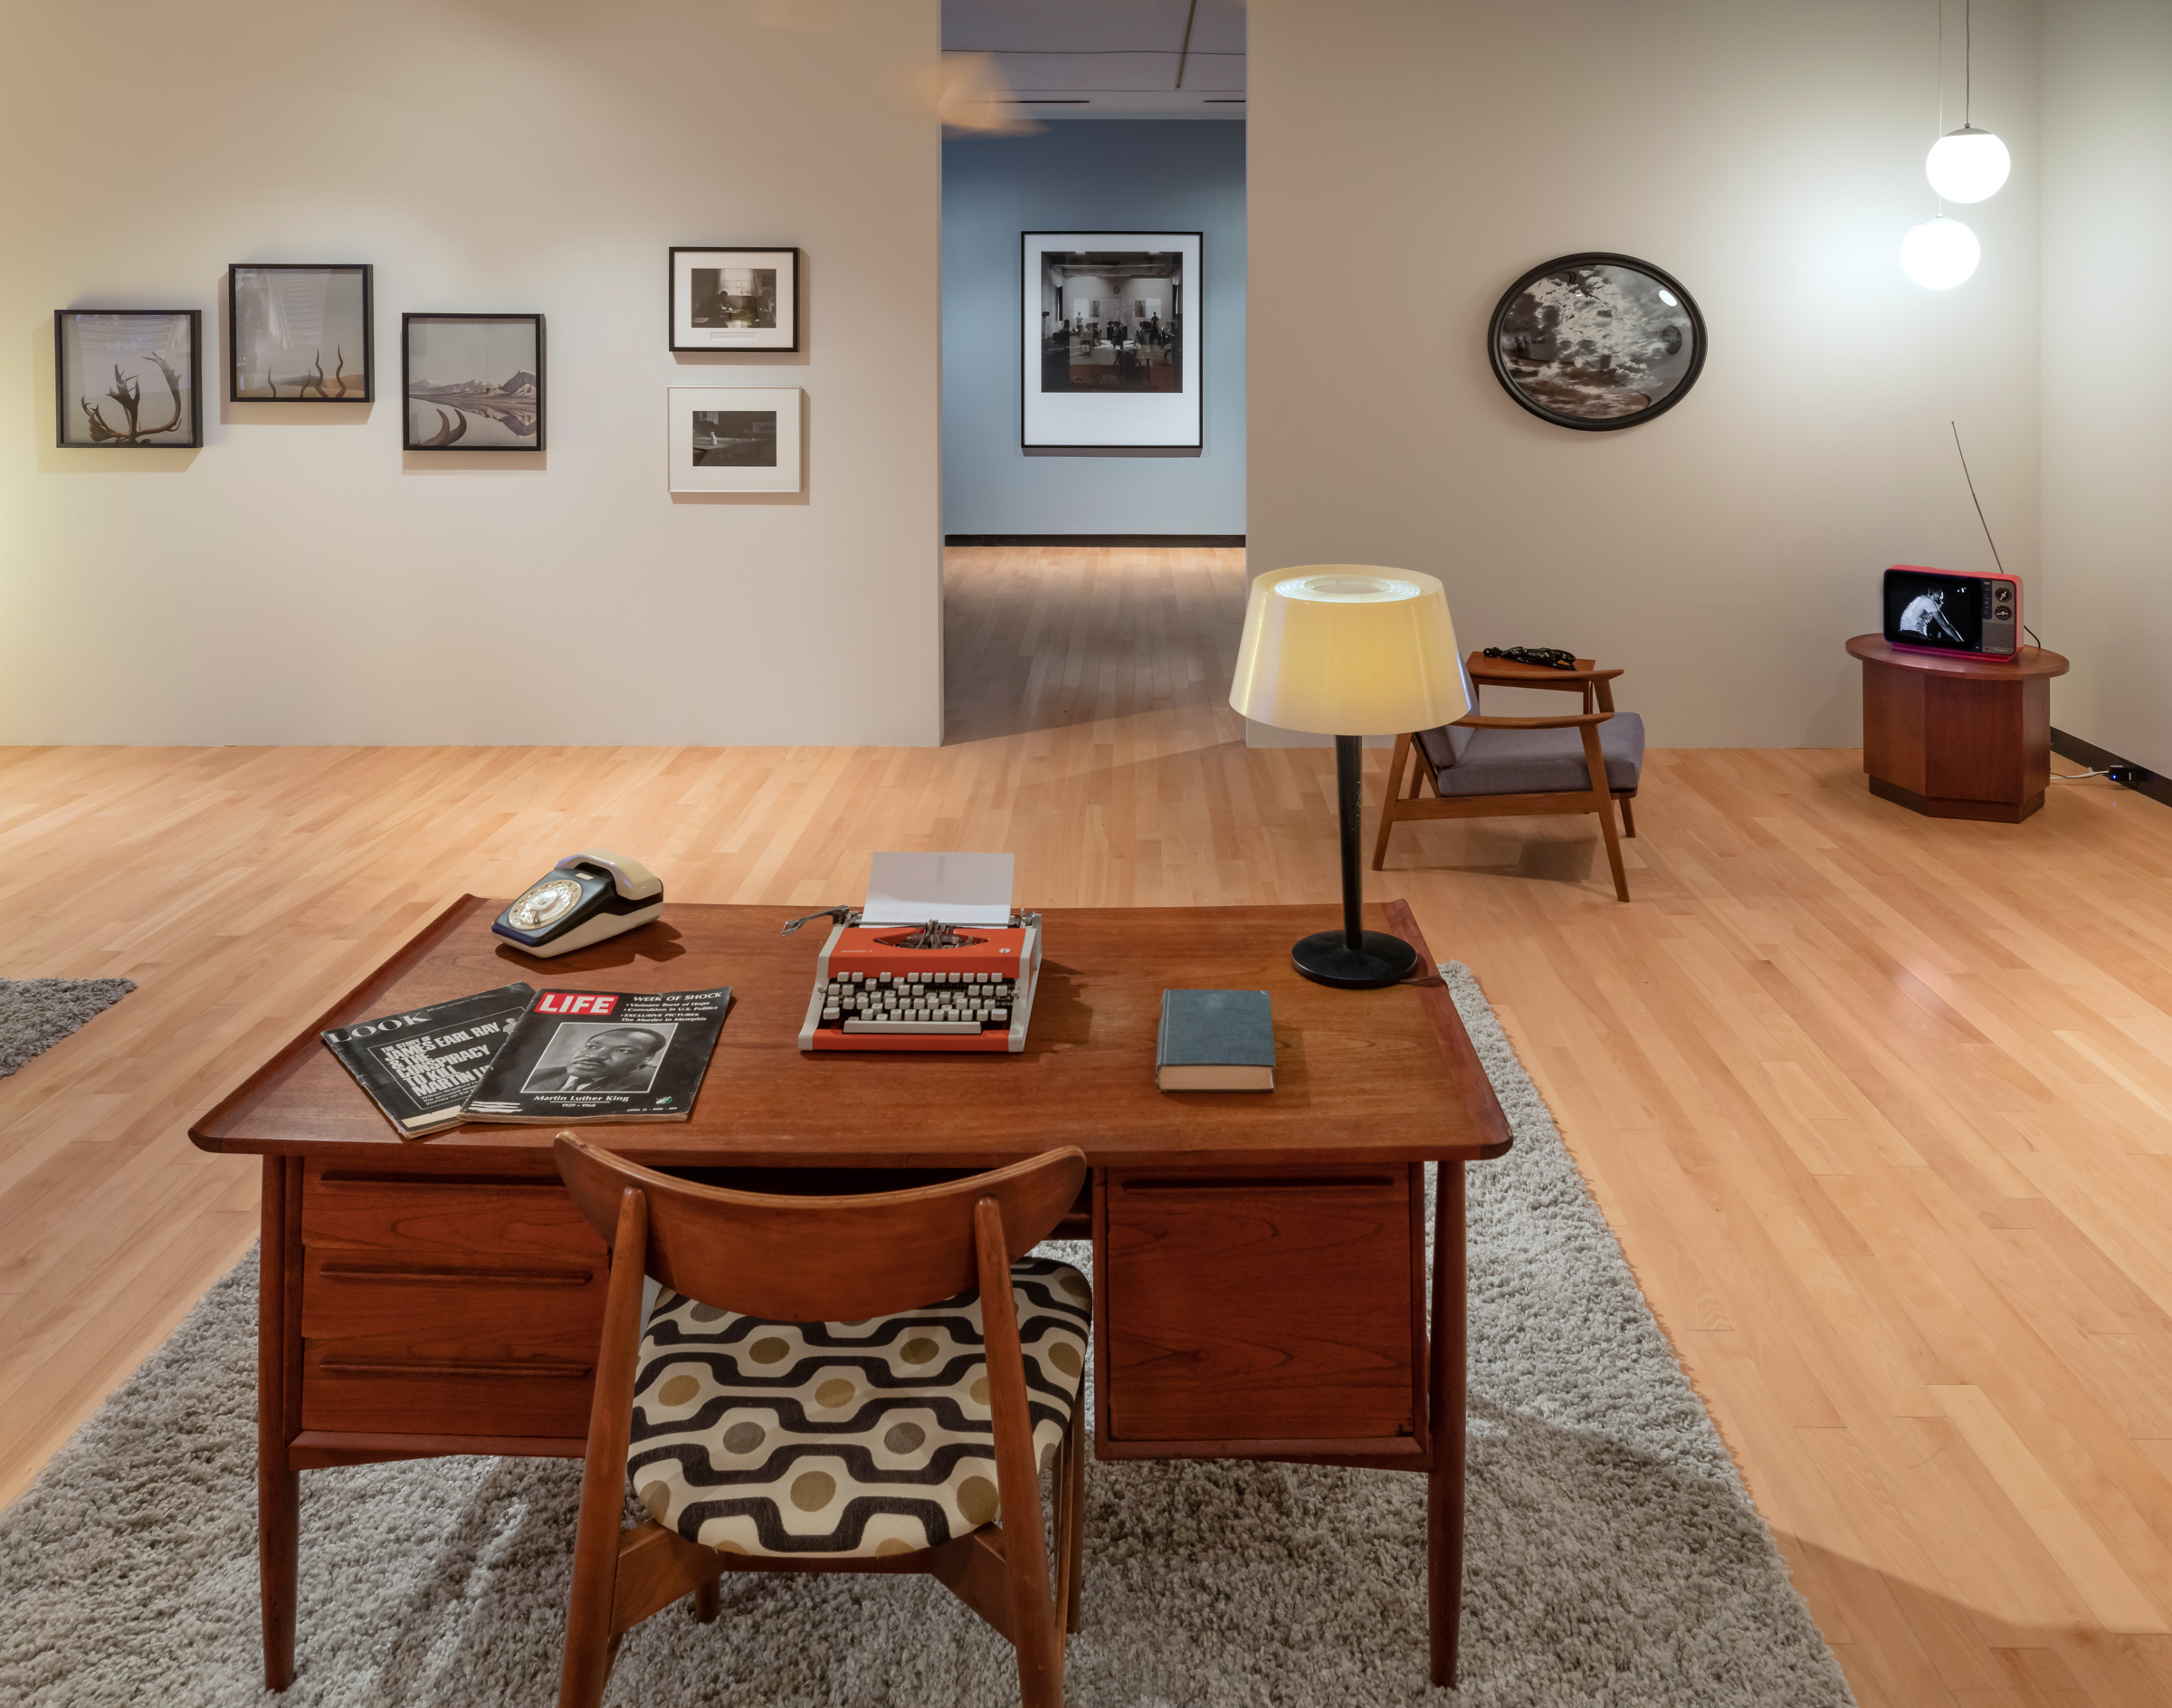     Installation view, Carrie Mae Weems, Heave, Photo: Toni Hafkenscheid. Courtesy the Art Museum at the University of Toronto, the artist, and Jack Shainman Gallery, New York, NY.

